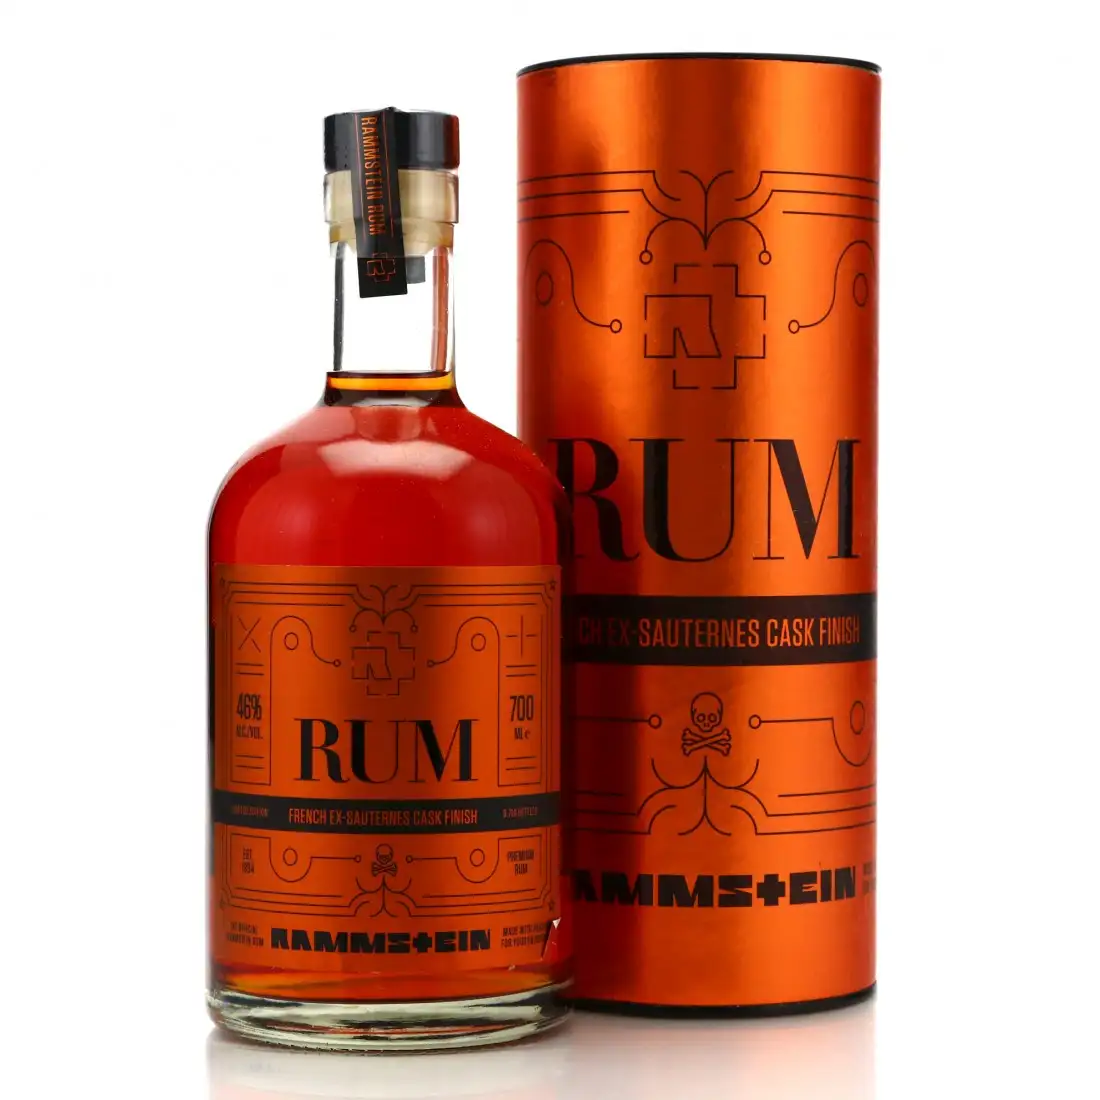 Rammstein Rum, The Caribbean  prices, reviews, stores & market trends